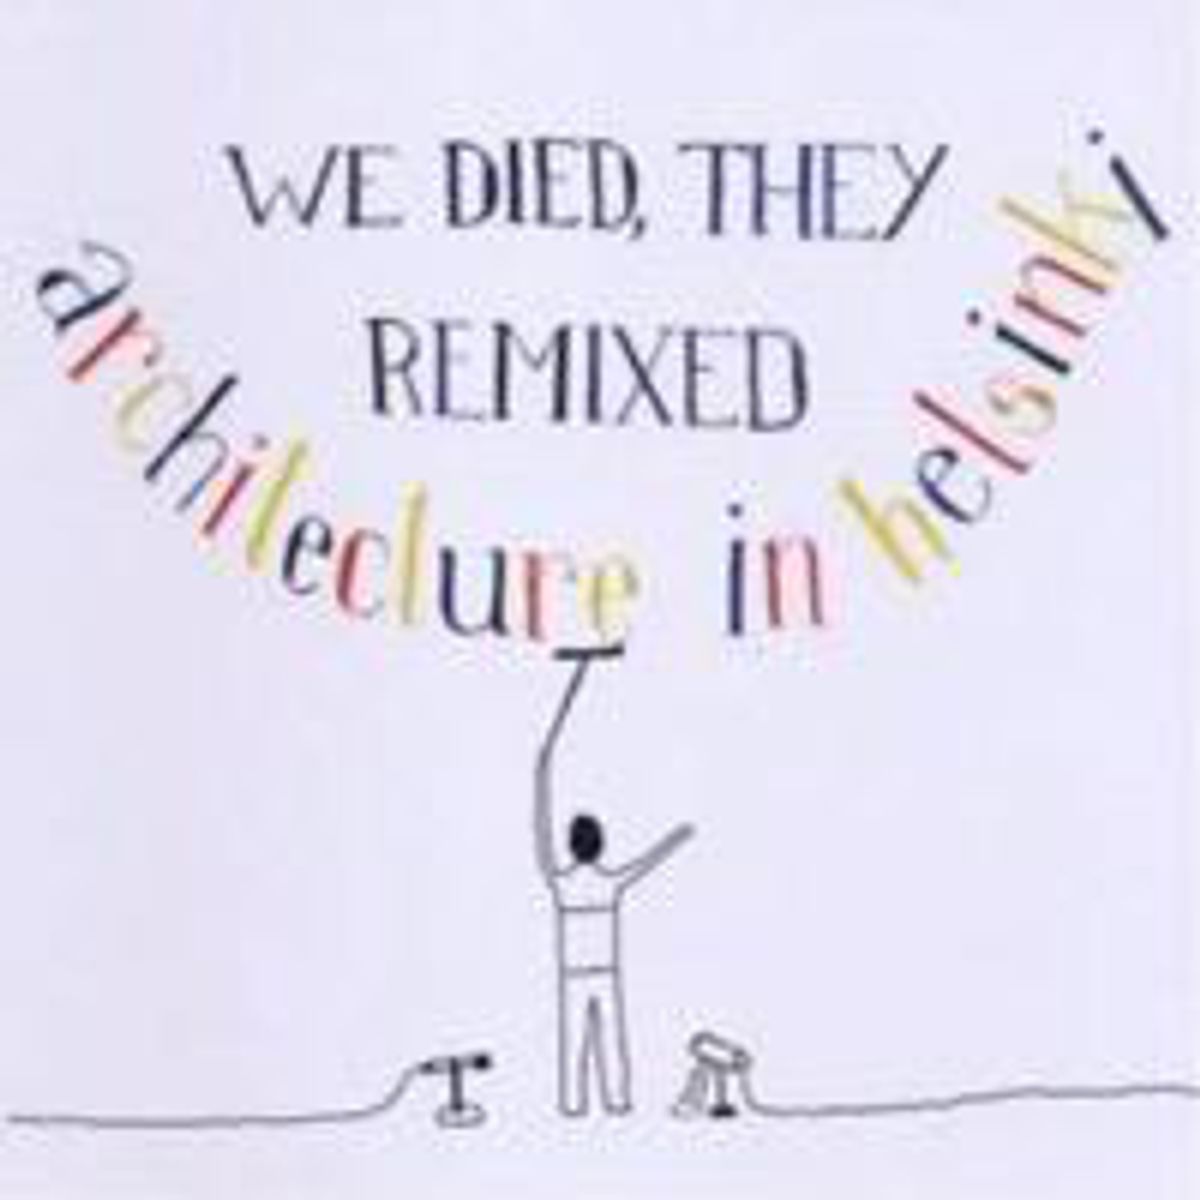 We Died, They Remixed